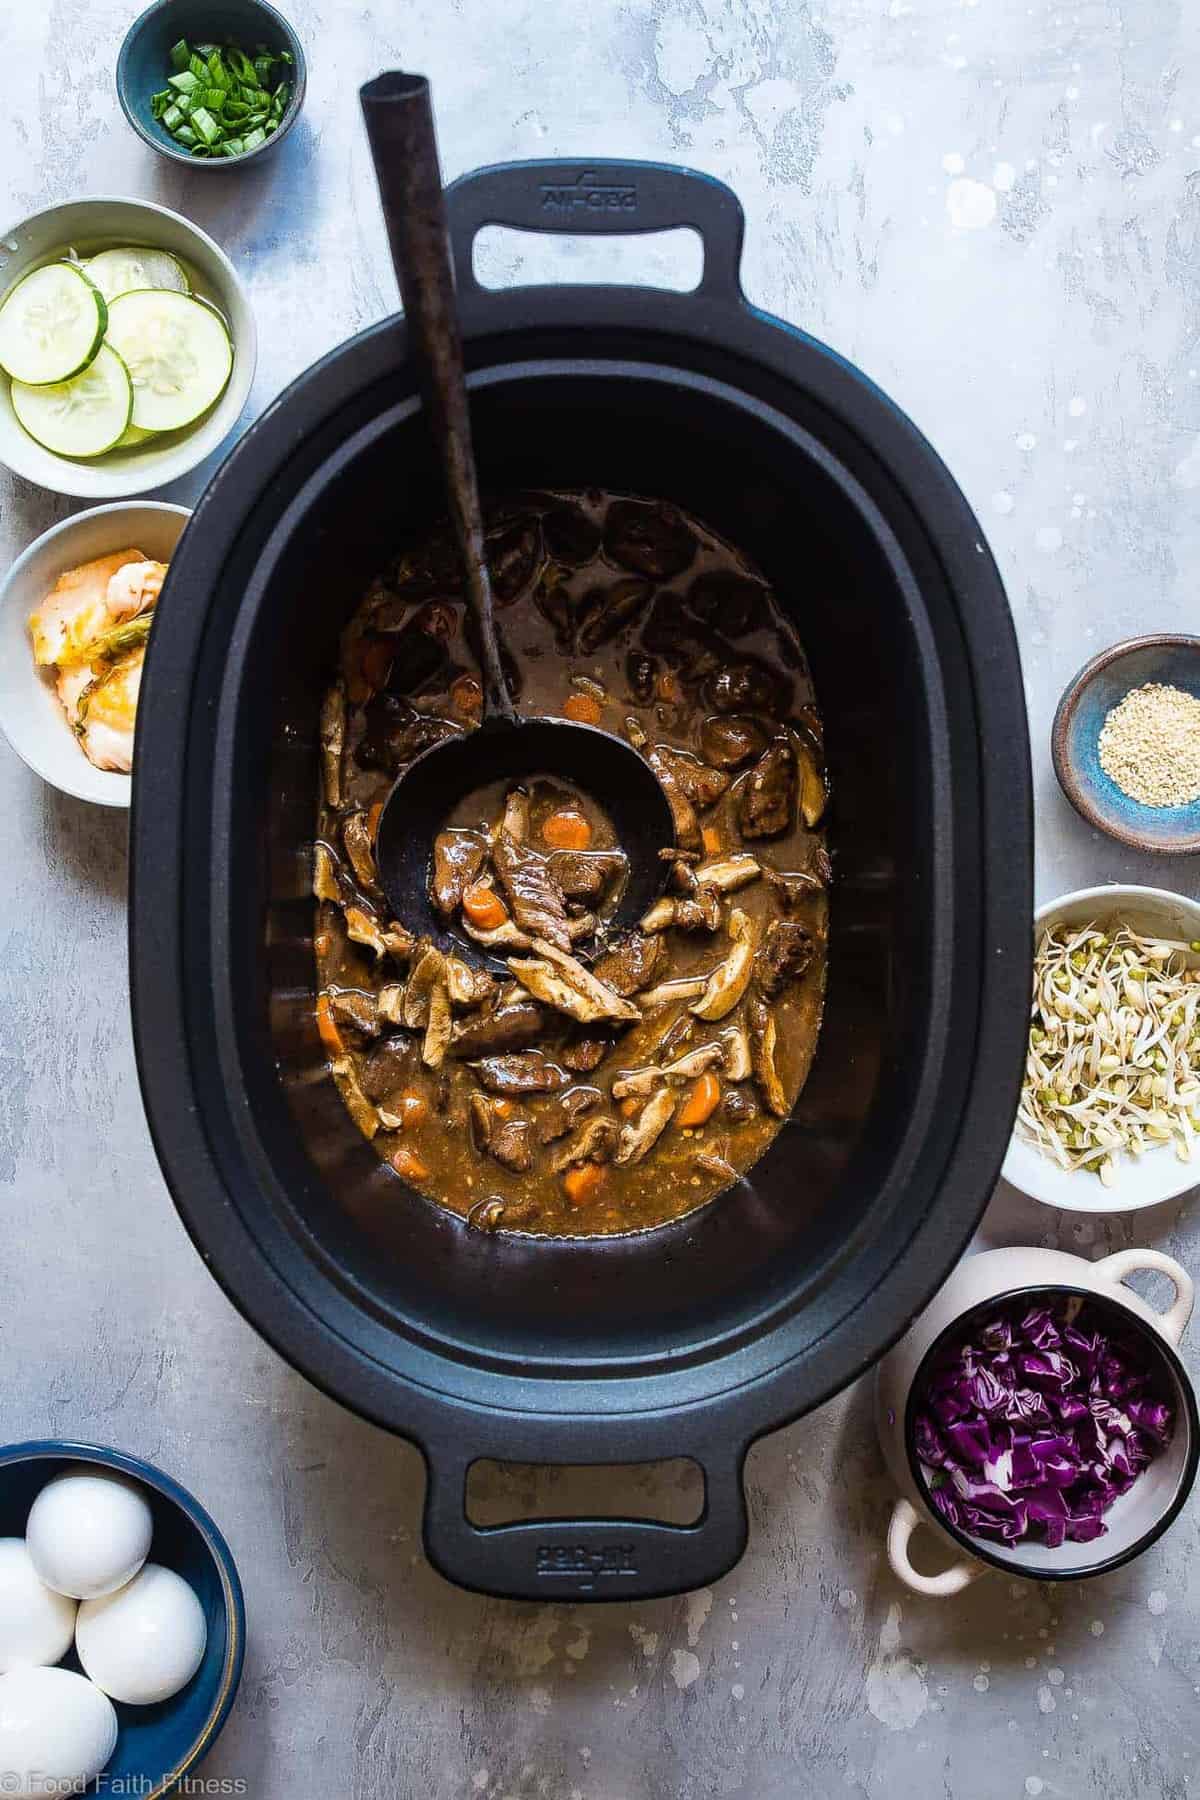 Slow Cooker Whole30 Paleo Korean Beef Stew - This Paleo Korean Whole30 Beef Stew is made in the crock pot for an easy gluten/grain/dairy/sugar free weeknight dinner with addicting spicy-sweet flavor! It's healthy comfort food at it's best!  | #Foodfaithfitness | #Glutenfree #Paleo #Whole30 #Slowcooker #Healthy